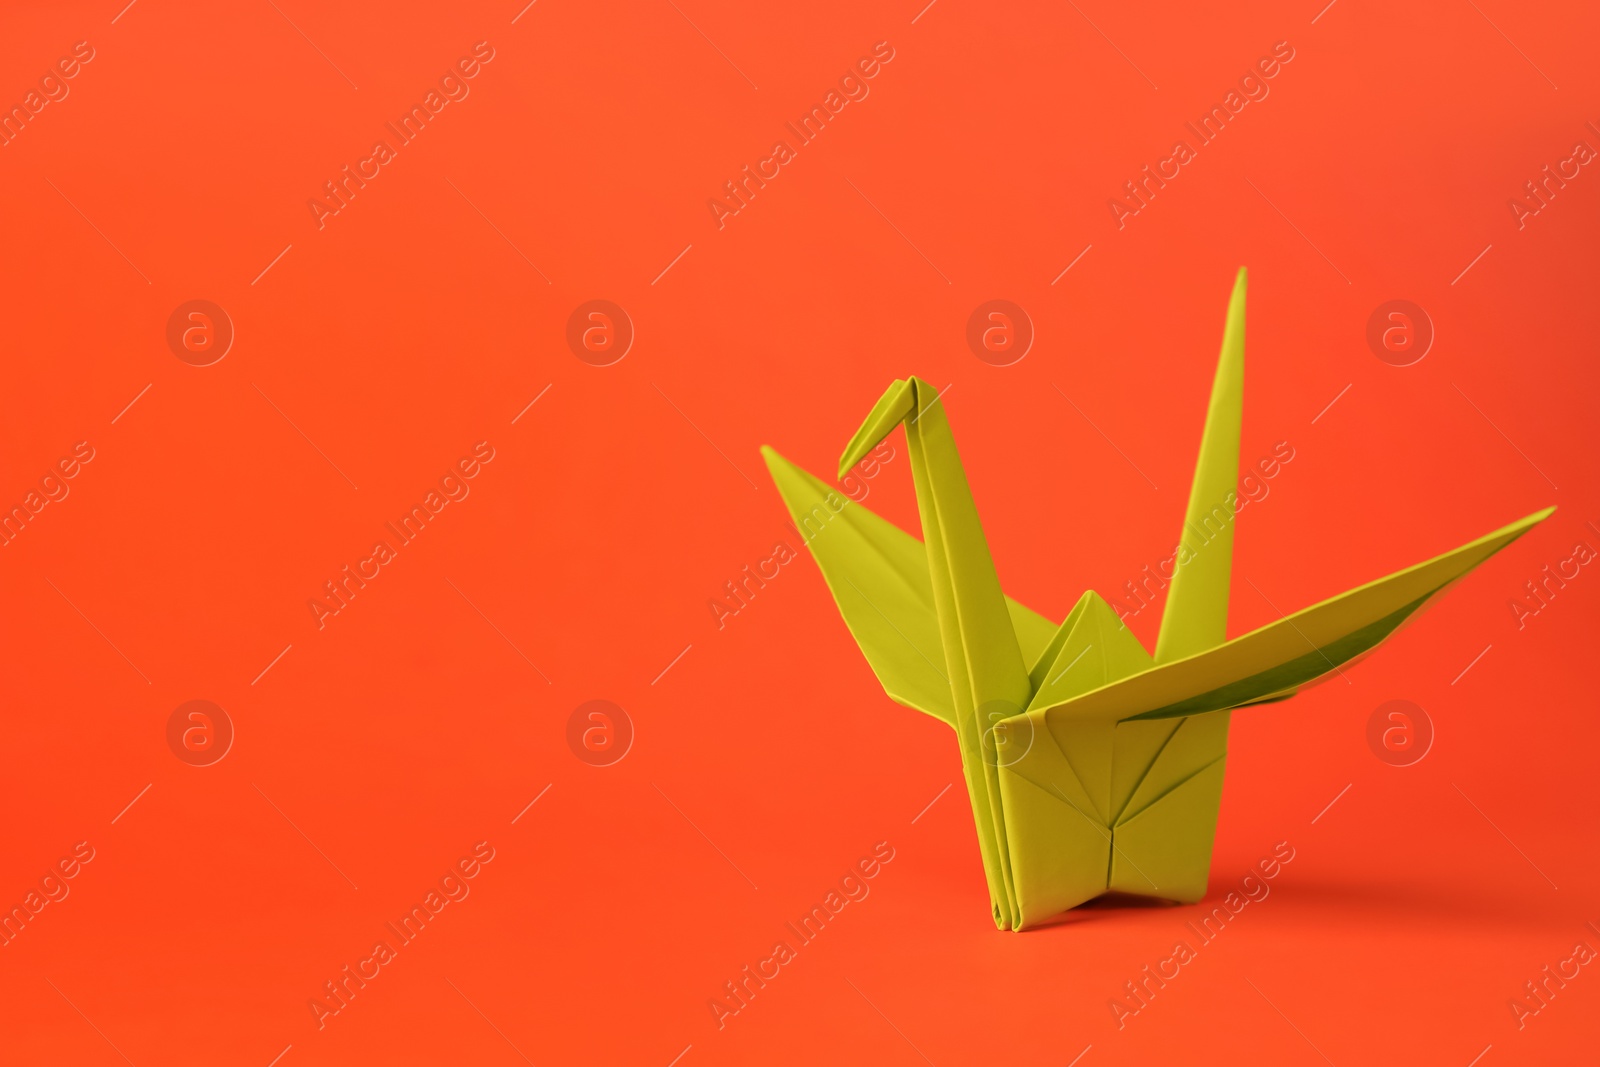 Photo of Origami art. Handmade paper crane on orange background, space for text